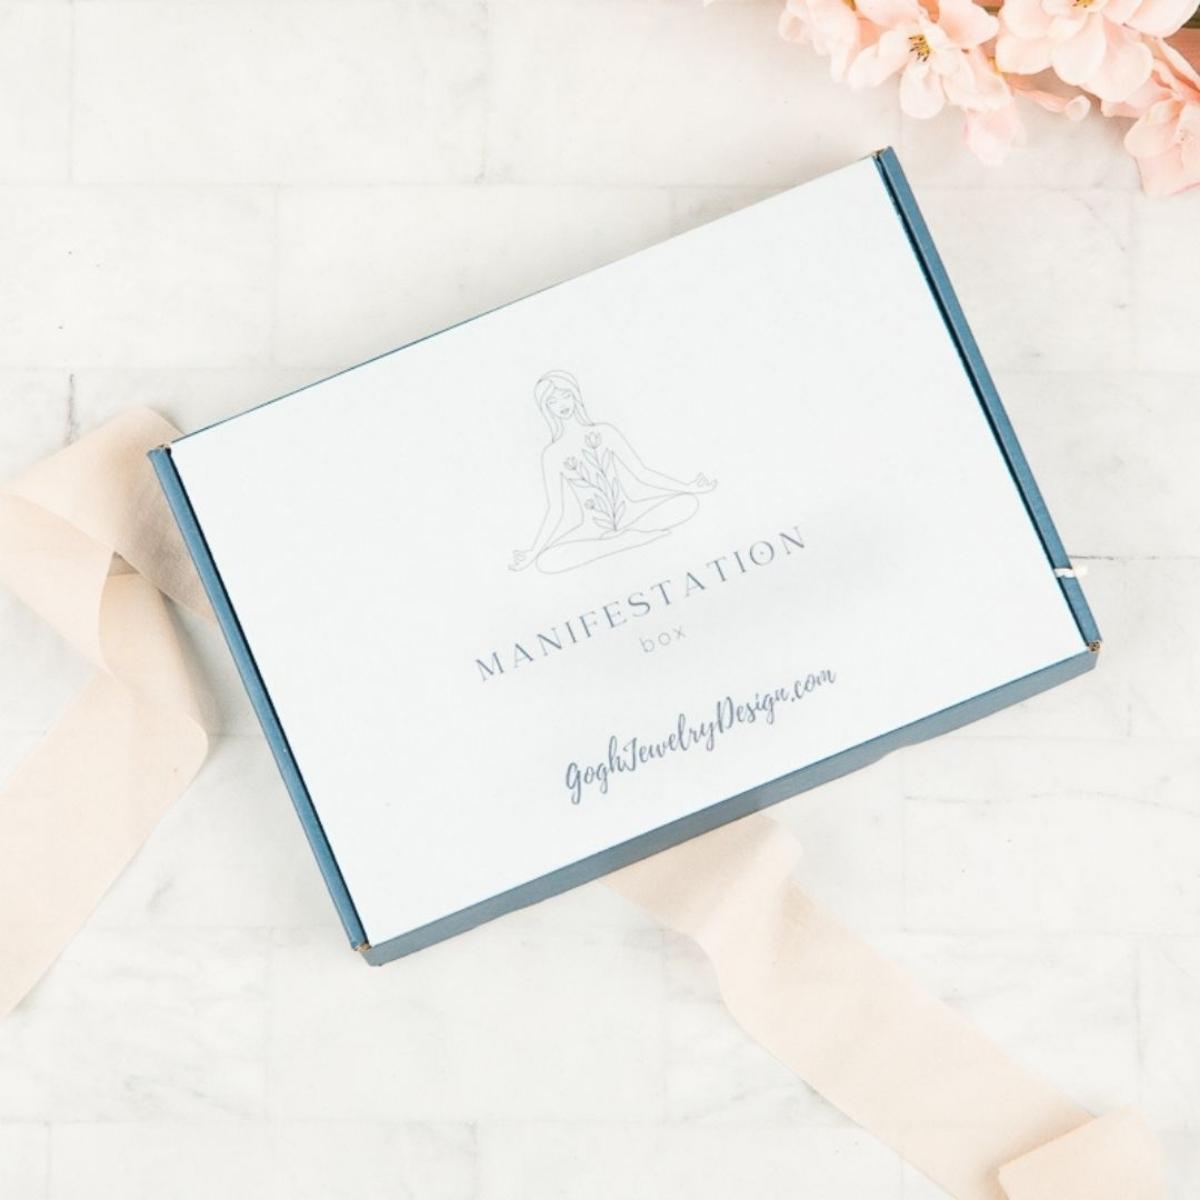 manifest the life you want to live with this manifestation Box SubscriptionComfort Zone - Manifestation Box